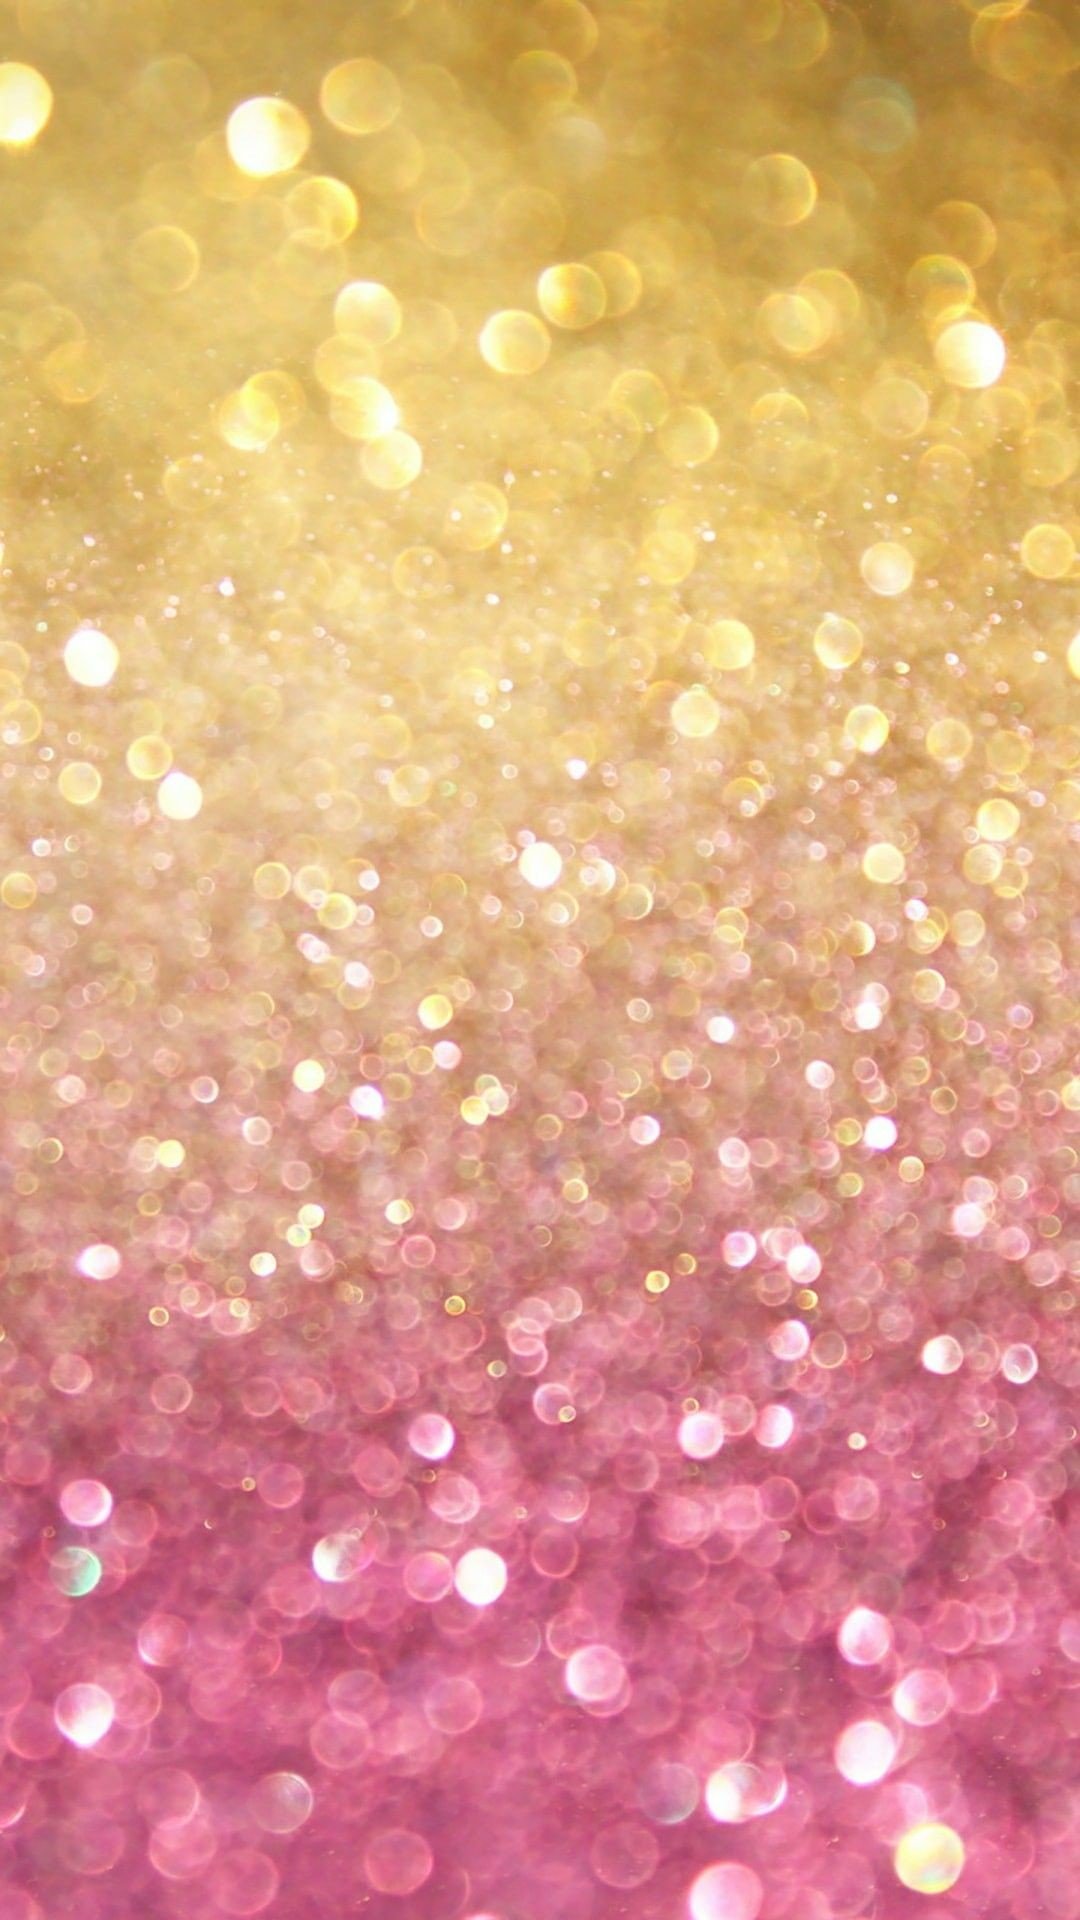 1080x Erase Board, iPhone Wallpaper, Phone Background, And Gold Glitter Background